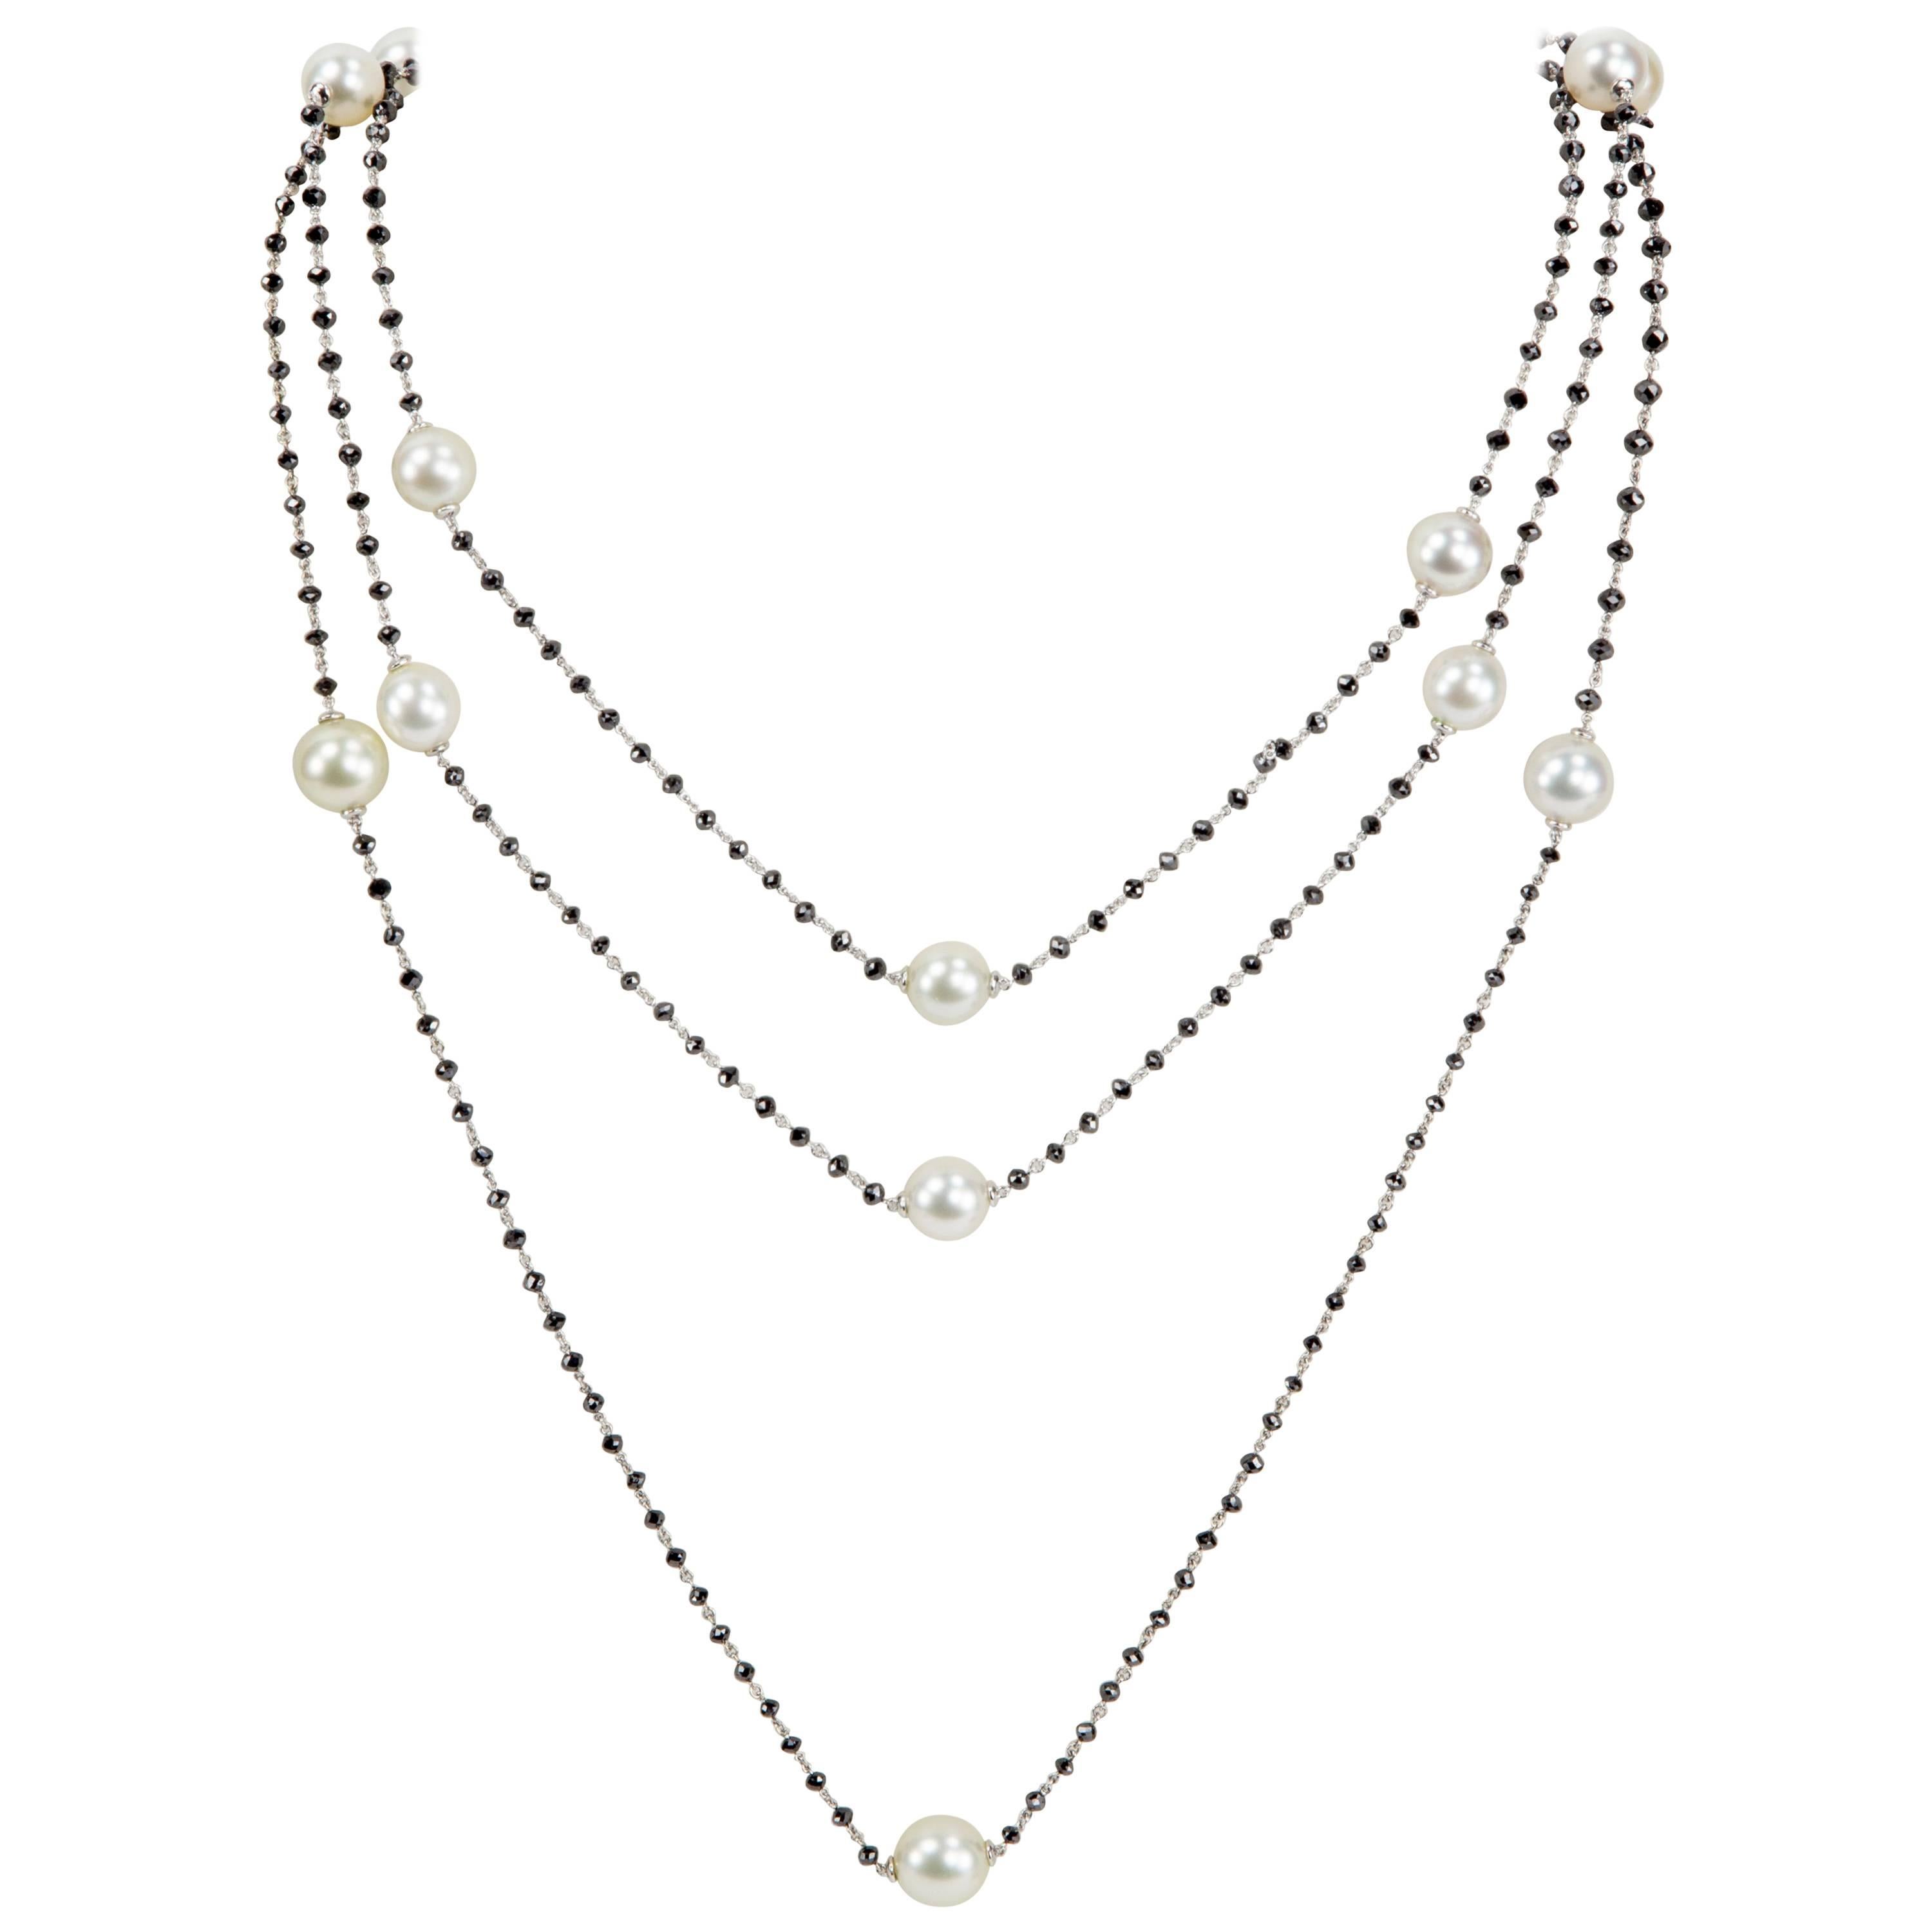 South Sea Pearls and Diamonds Gold Necklace